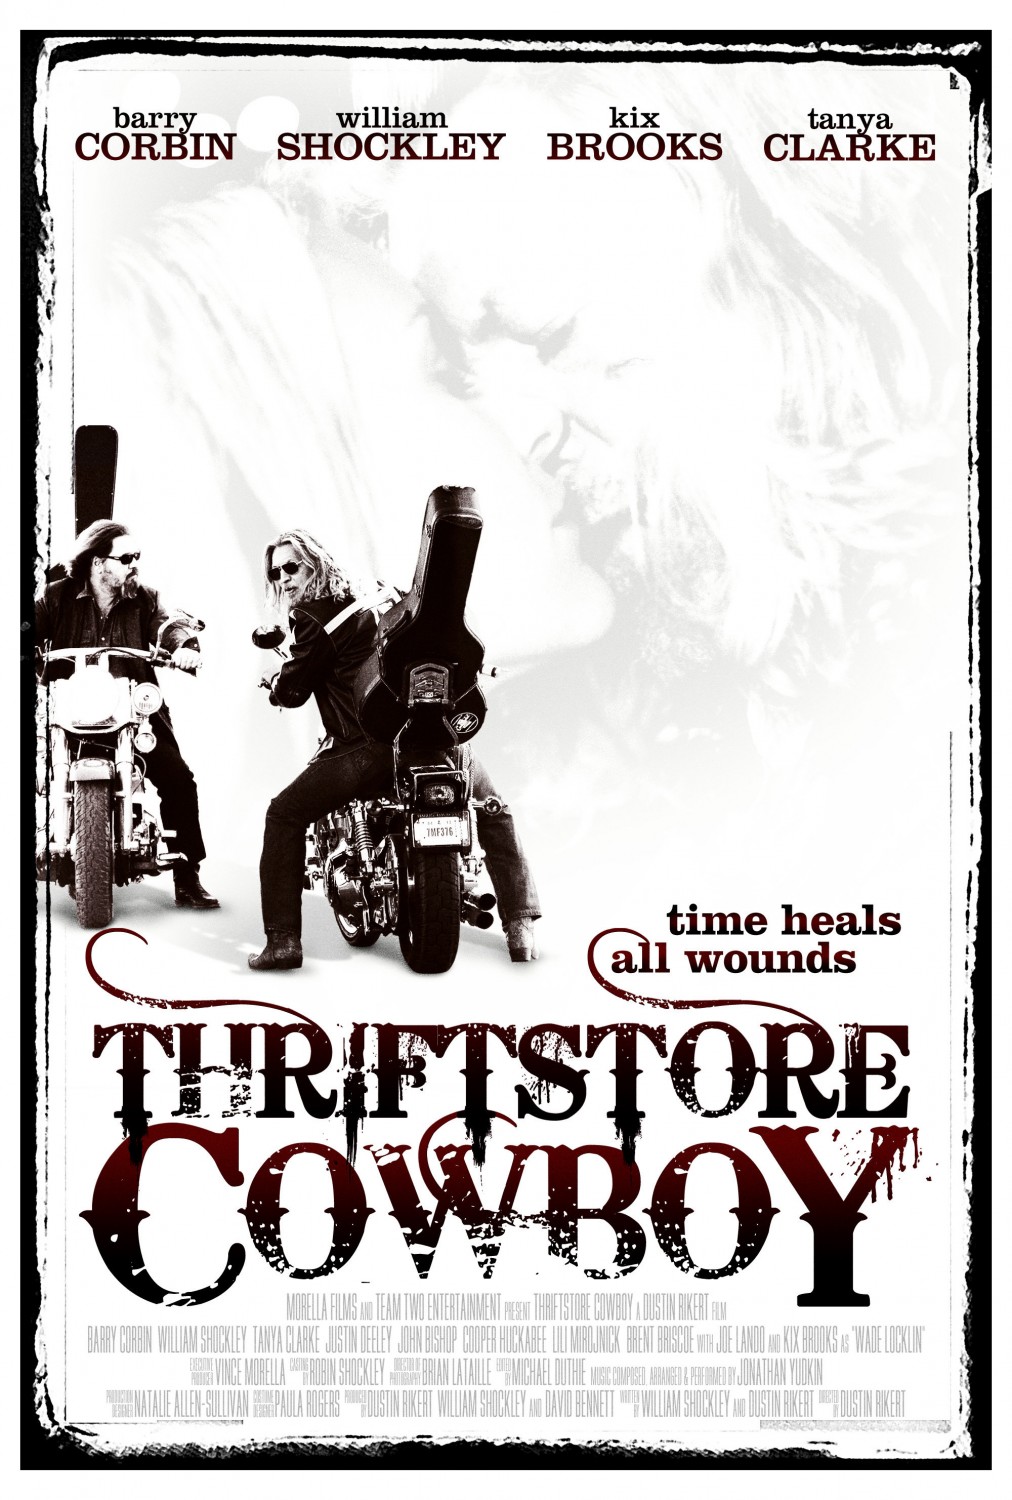 Extra Large Movie Poster Image for Thriftstore Cowboy 